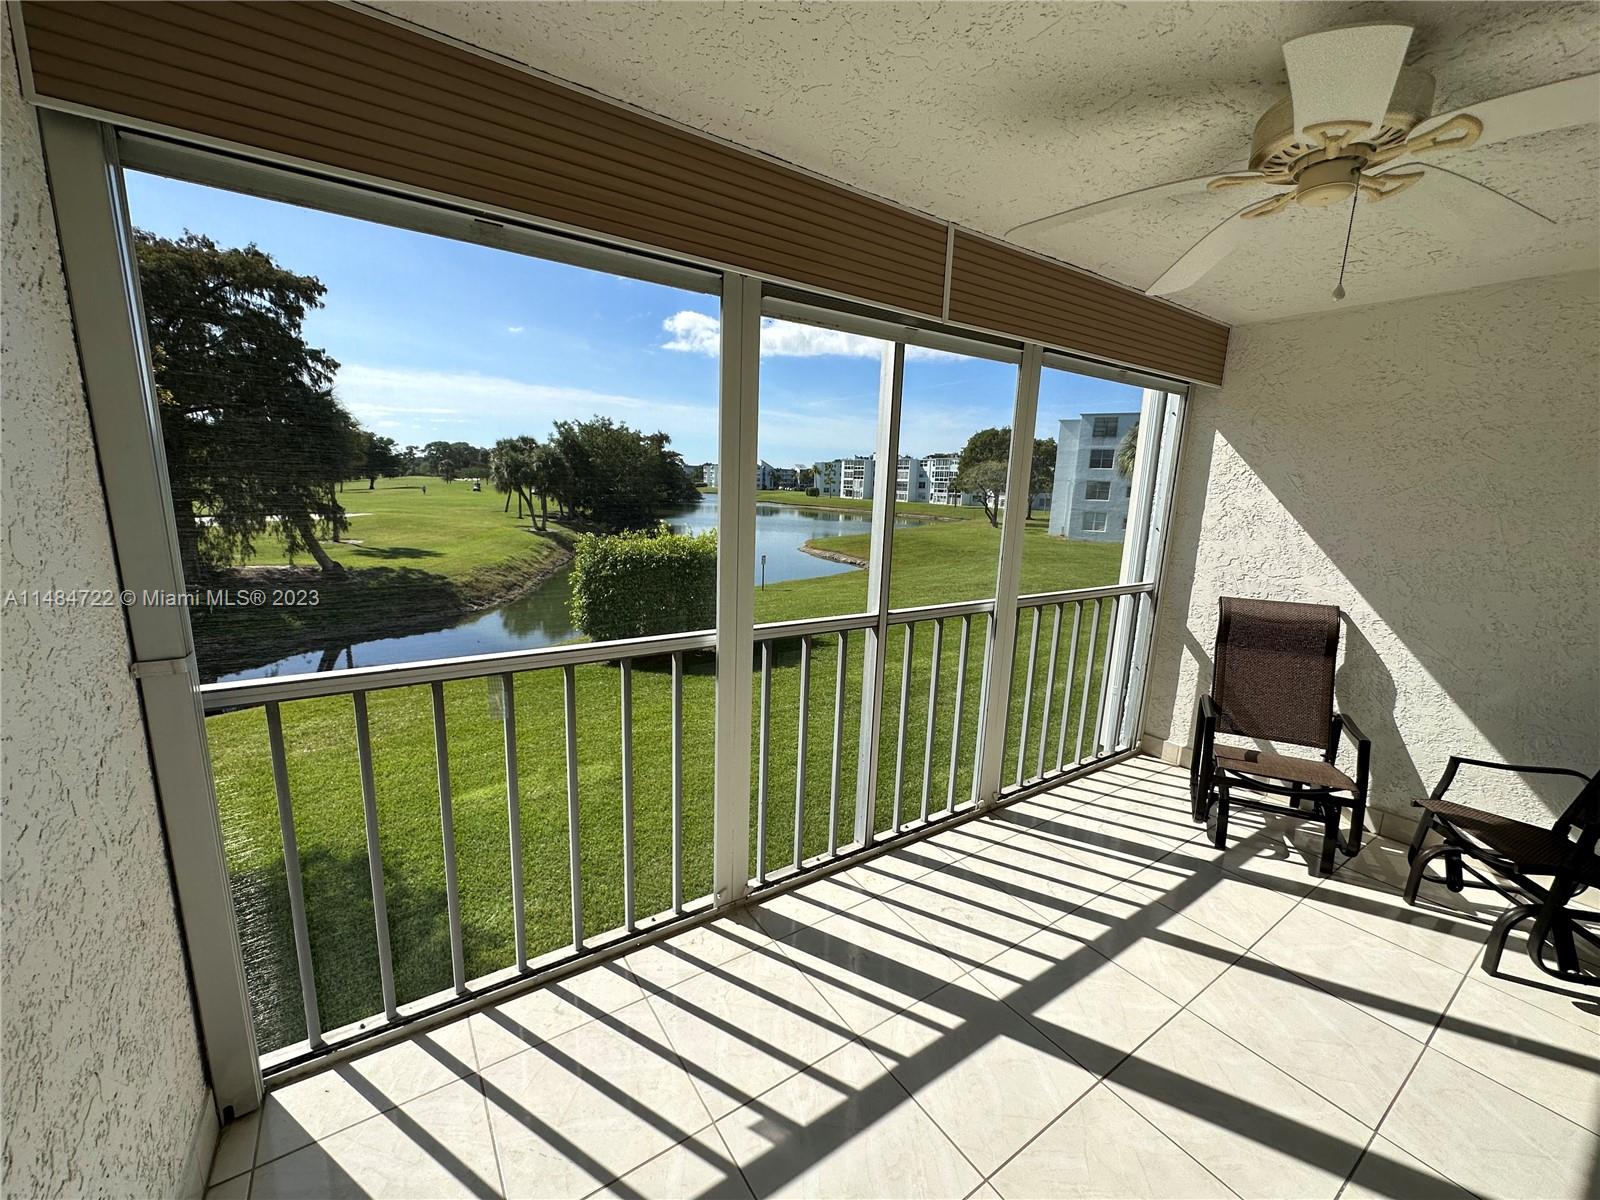 7800 NW 18th St 203, Margate, Florida 33063, 2 Bedrooms Bedrooms, ,2 BathroomsBathrooms,Residential,For Sale,7800 NW 18th St 203,A11484722